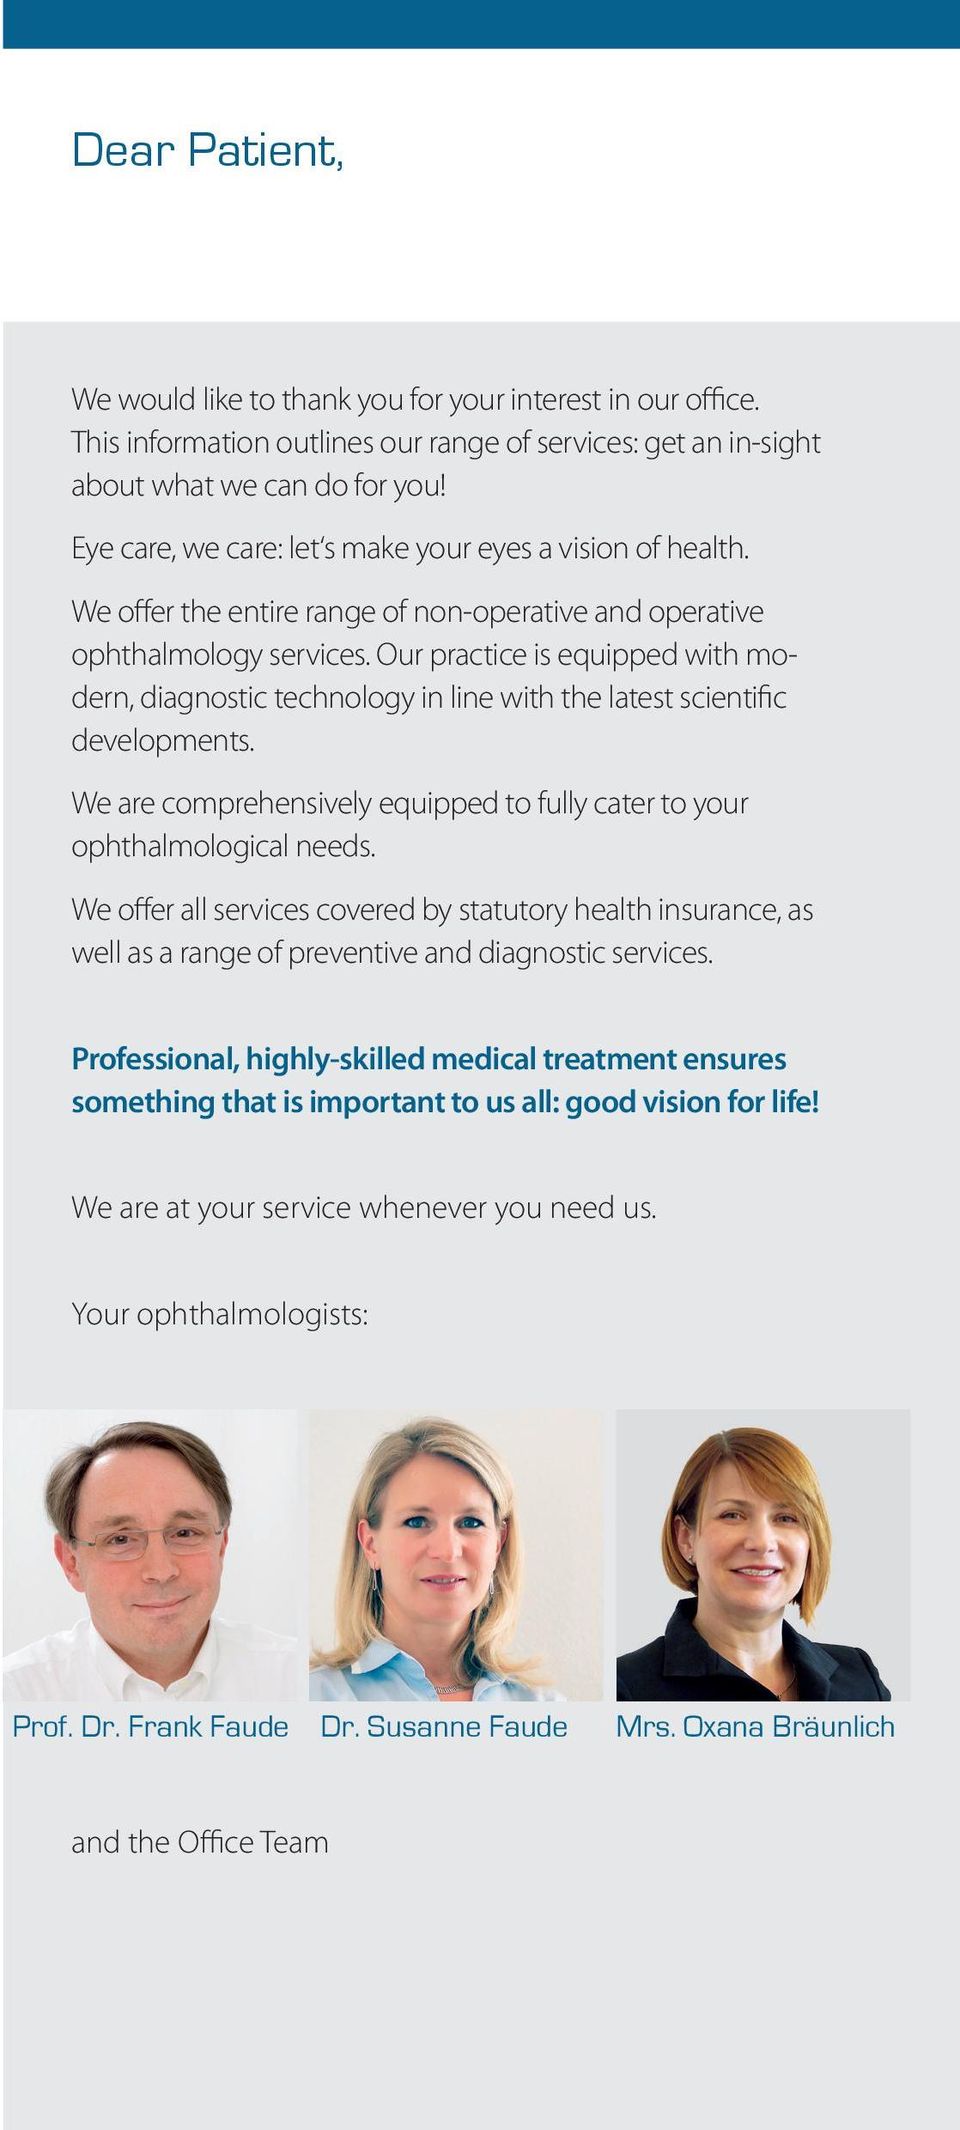 Our practice is equipped with modern, diagnostic technology in line with the latest scientific developments. We are comprehensively equipped to fully cater to your ophthalmological needs.